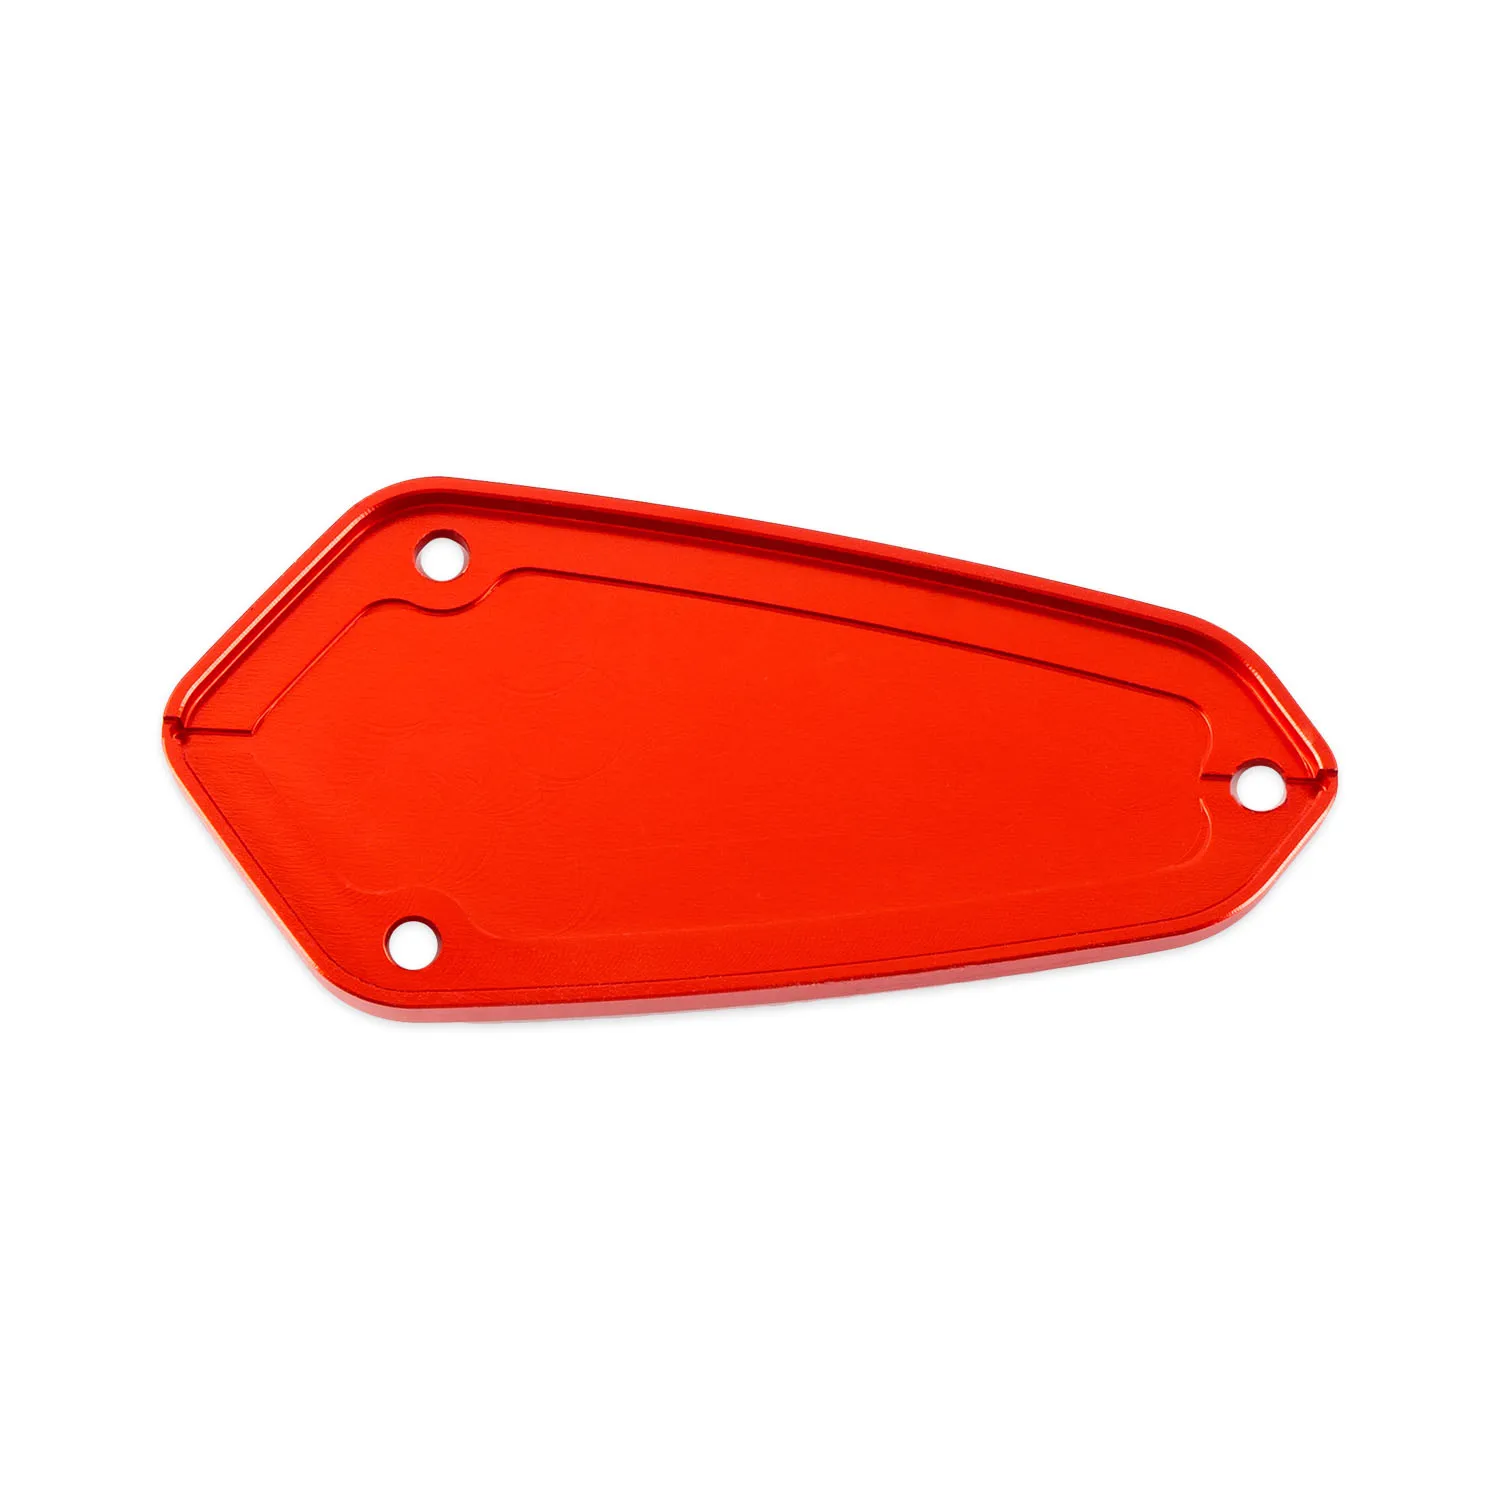 Motorcycle Front Brake Fluid Reservoir Cap Cover Tank Oil Cup Cover For Kawasaki Z1000 2010-2021 enlarge